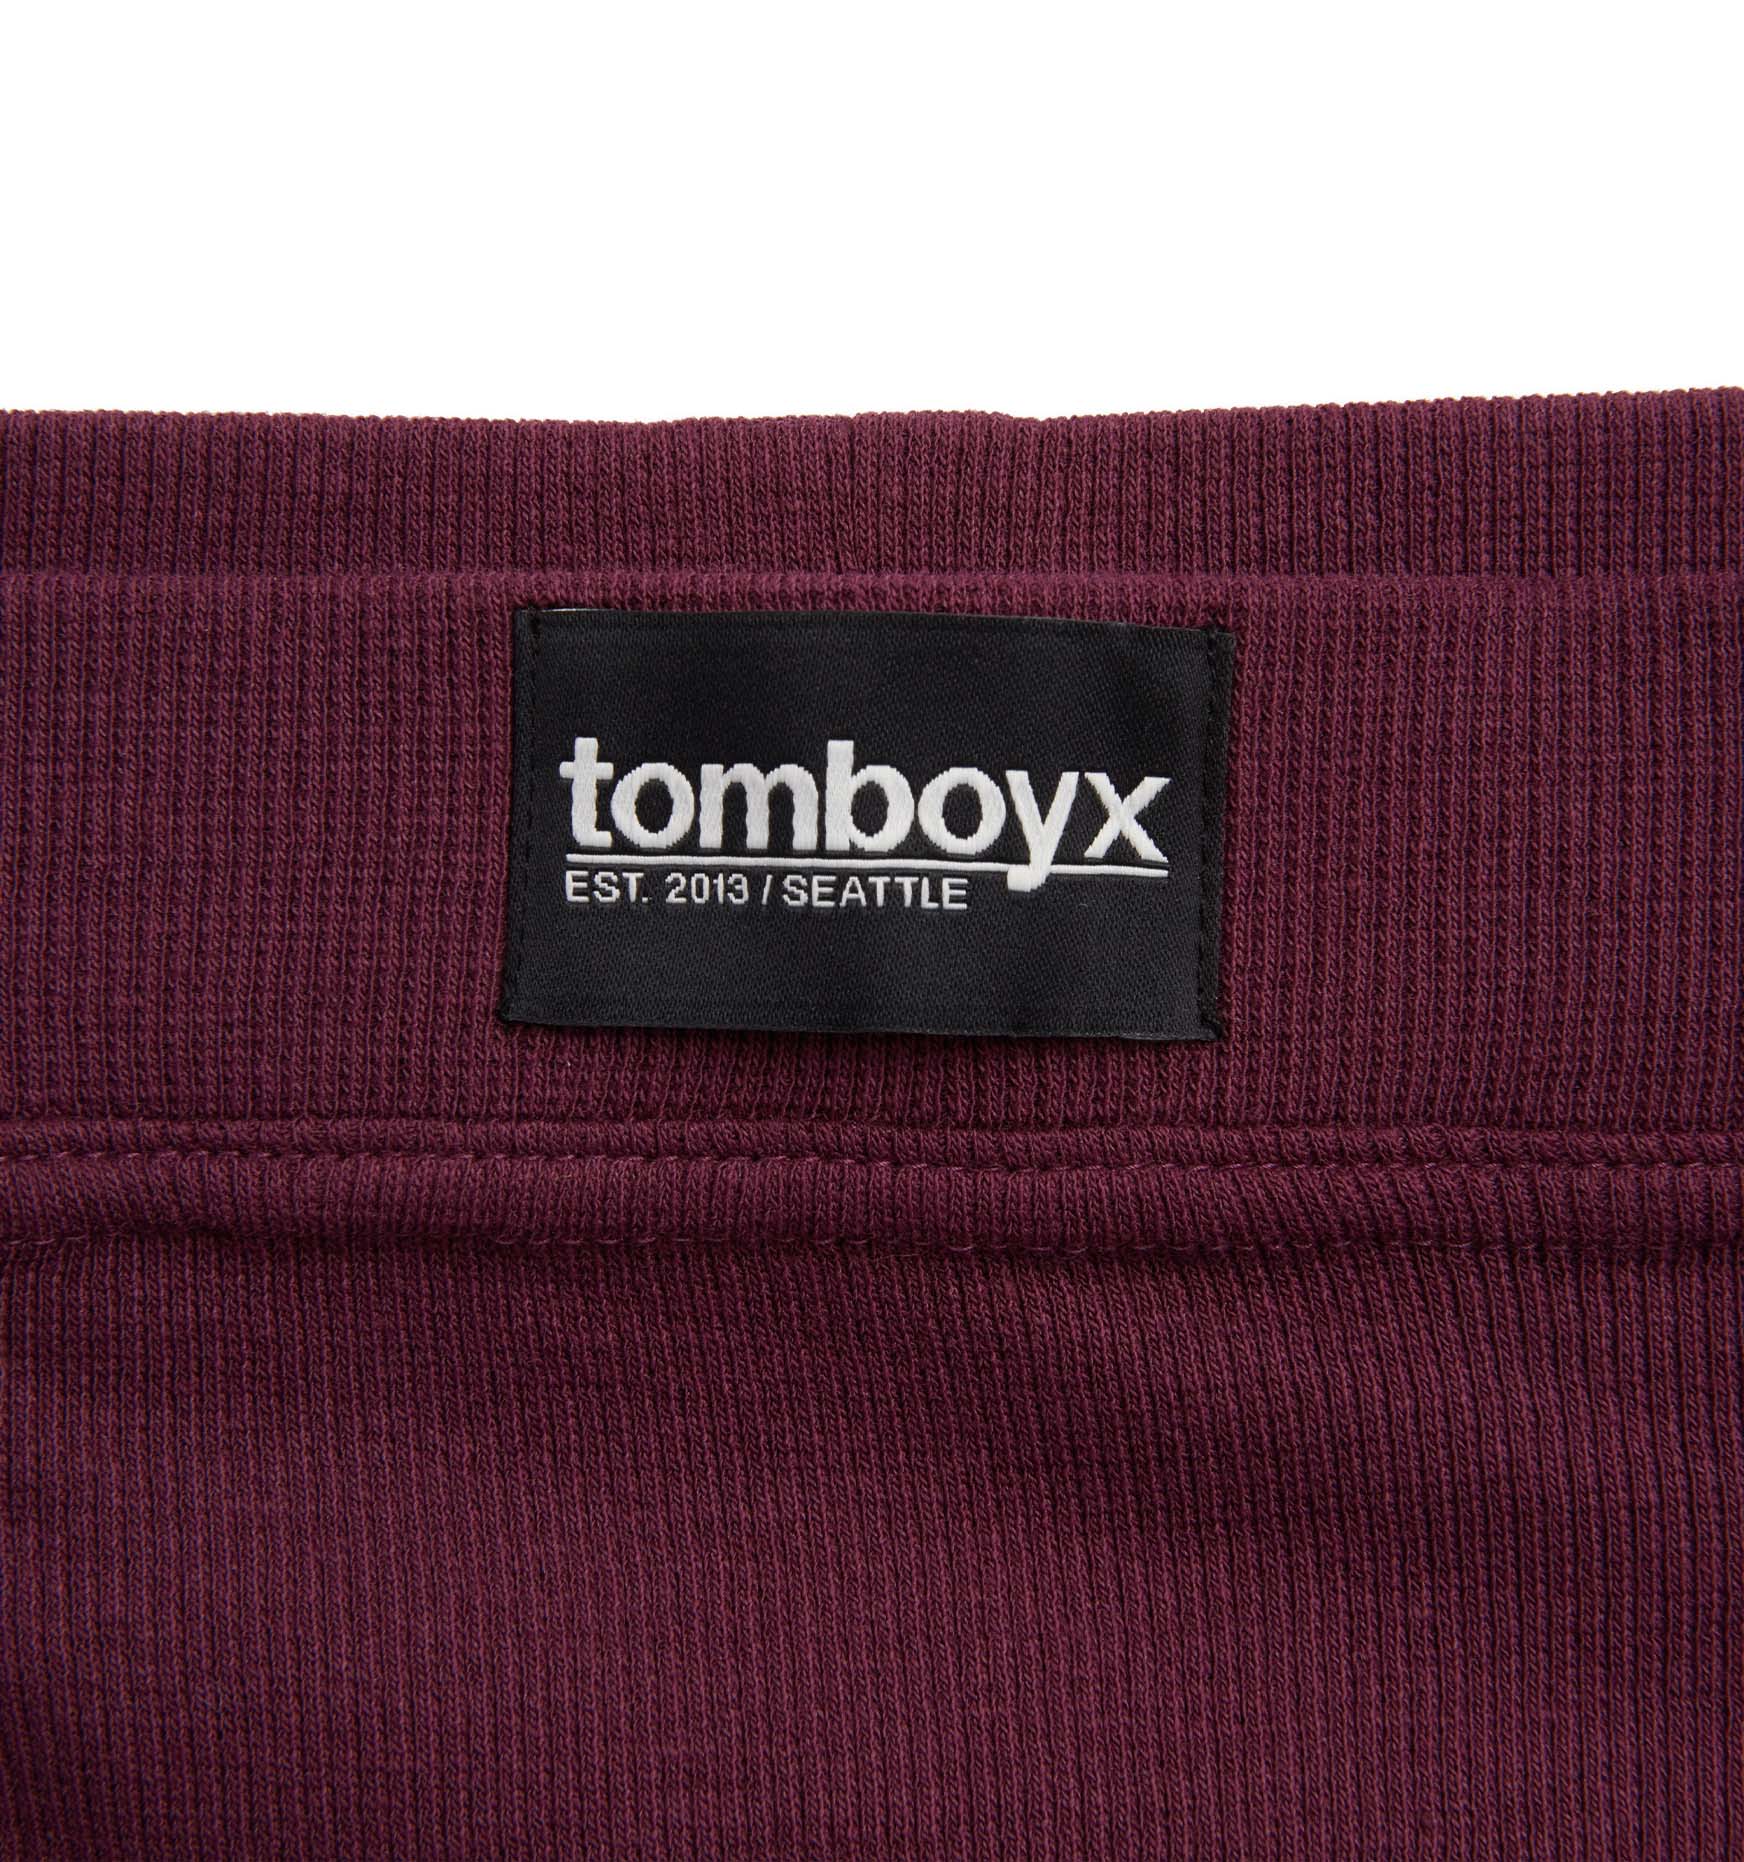 TomboyX Just Released an Organic Cotton Rib Collection & It's